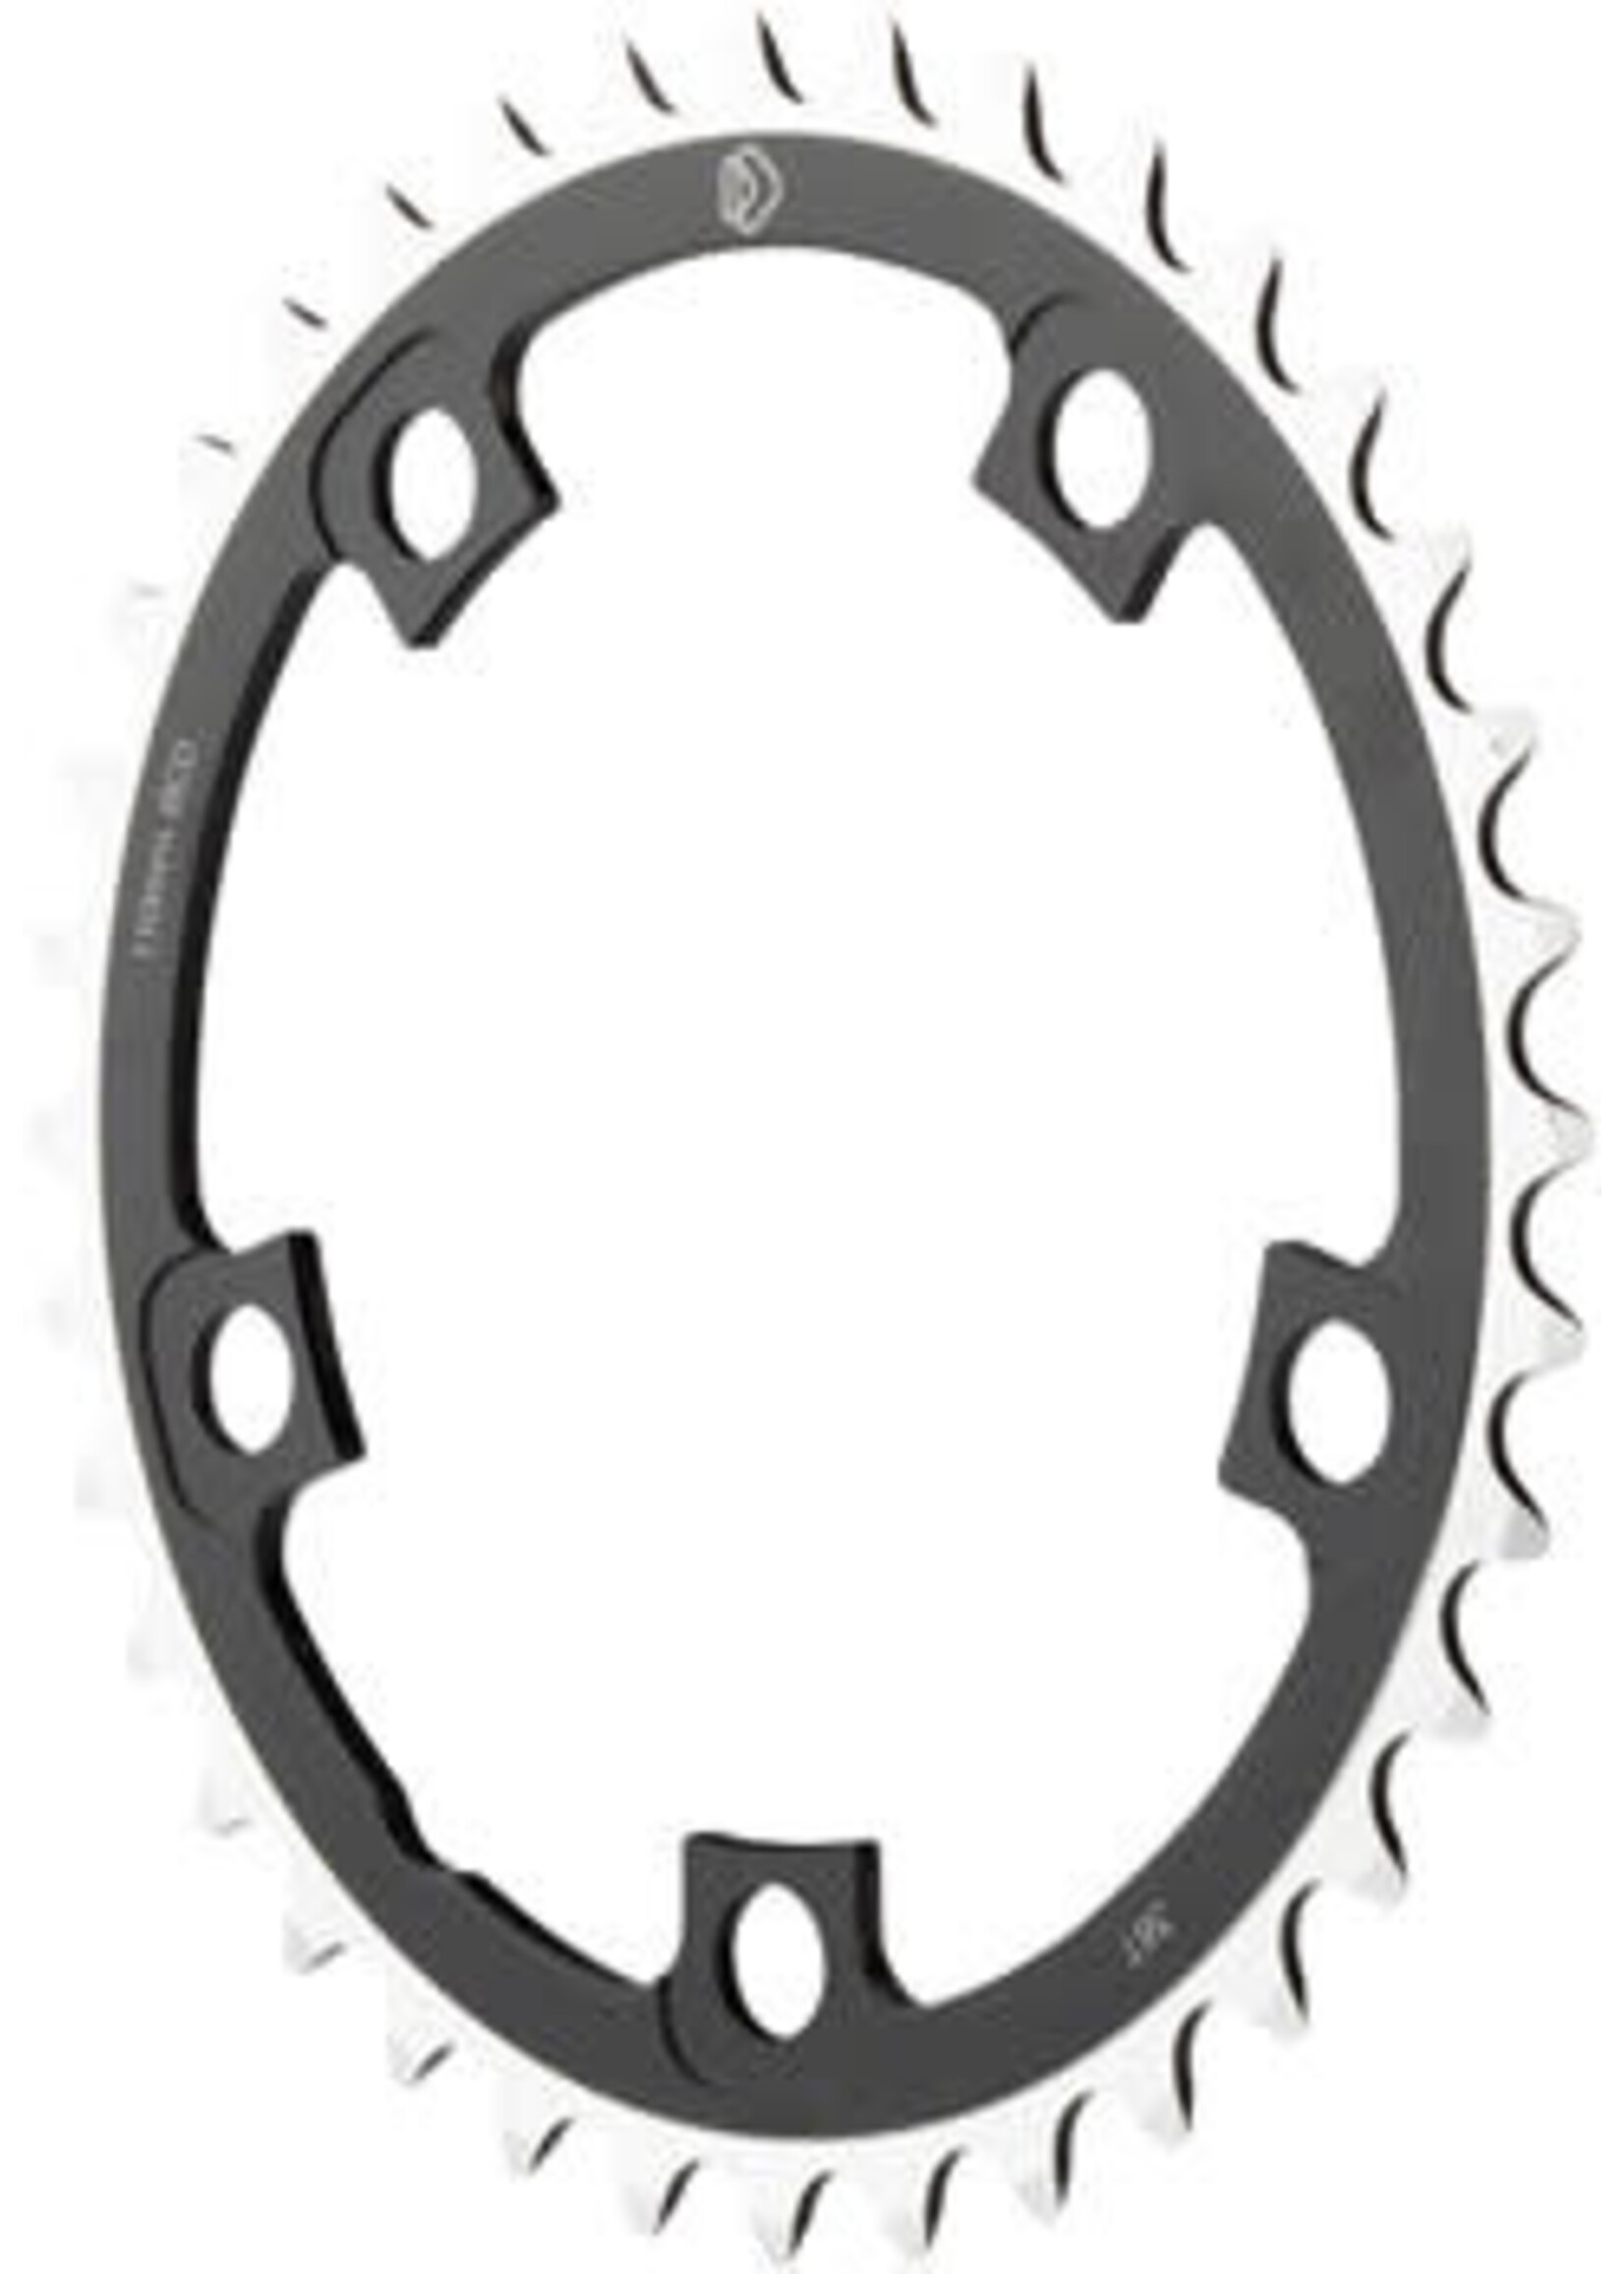 Dimension Dimension Multi Speed Chainring - 34T, 110mm BCD, Middle, Black